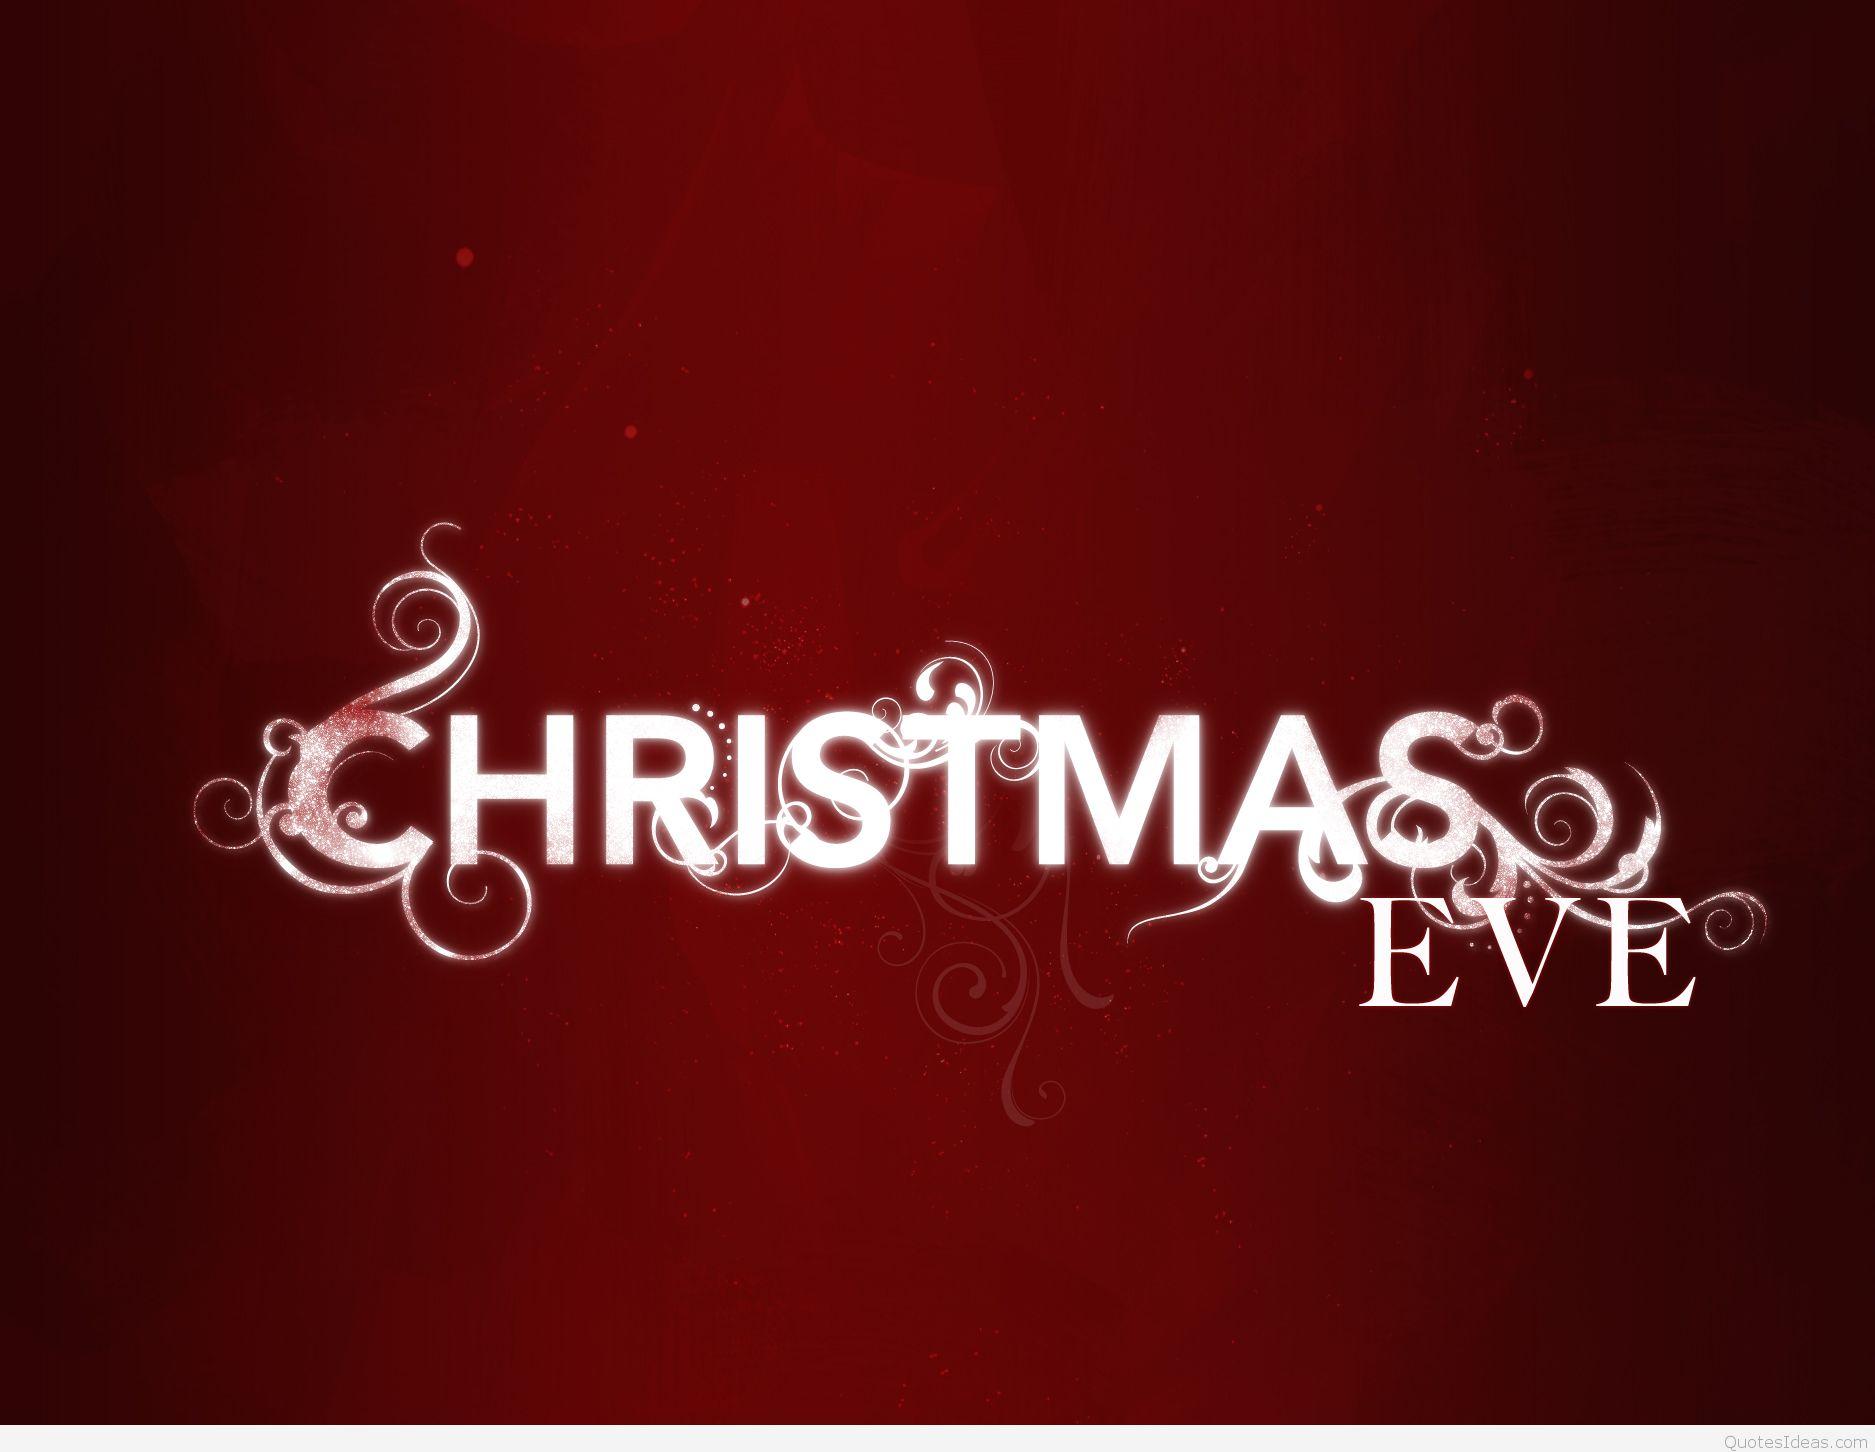 Merry Christmas eve wallpaper quotes & Christmas cards